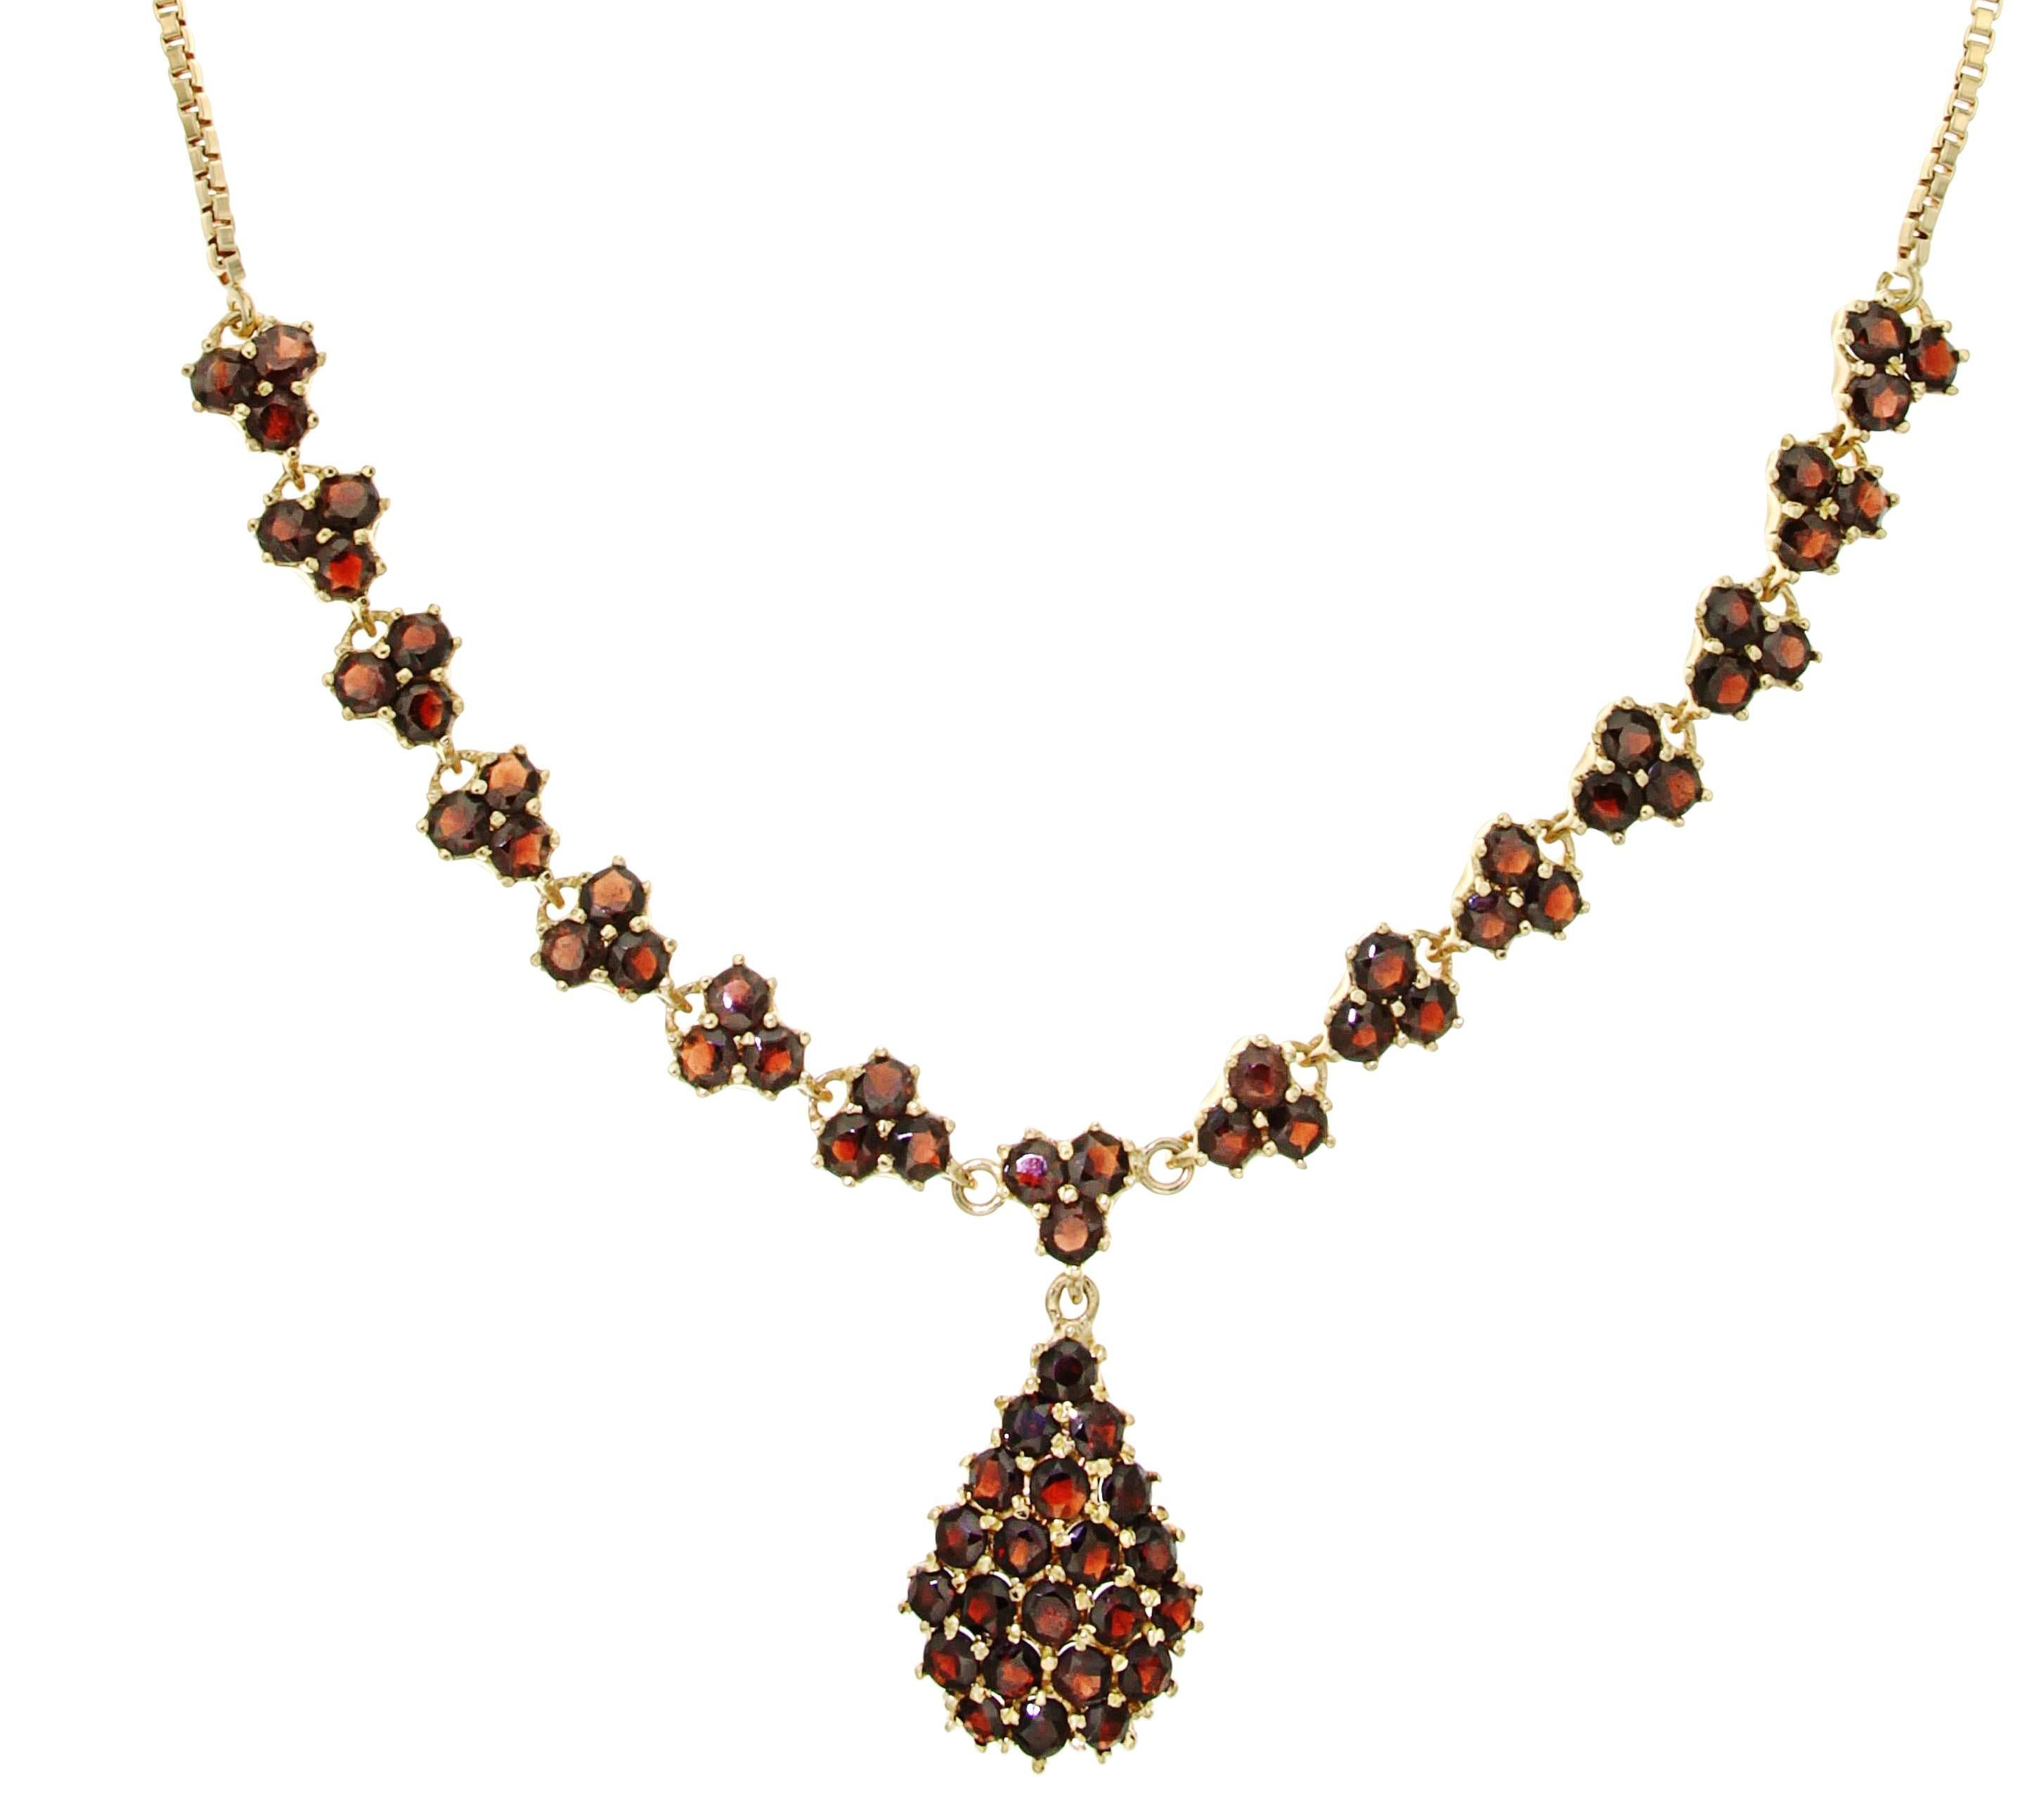 Beautiful 18K Gold necklace with garnet. Total weight 31 grams. The central drop measure: width 18 millimeters and length 25 millimeters / 0.708661 x 0.984252